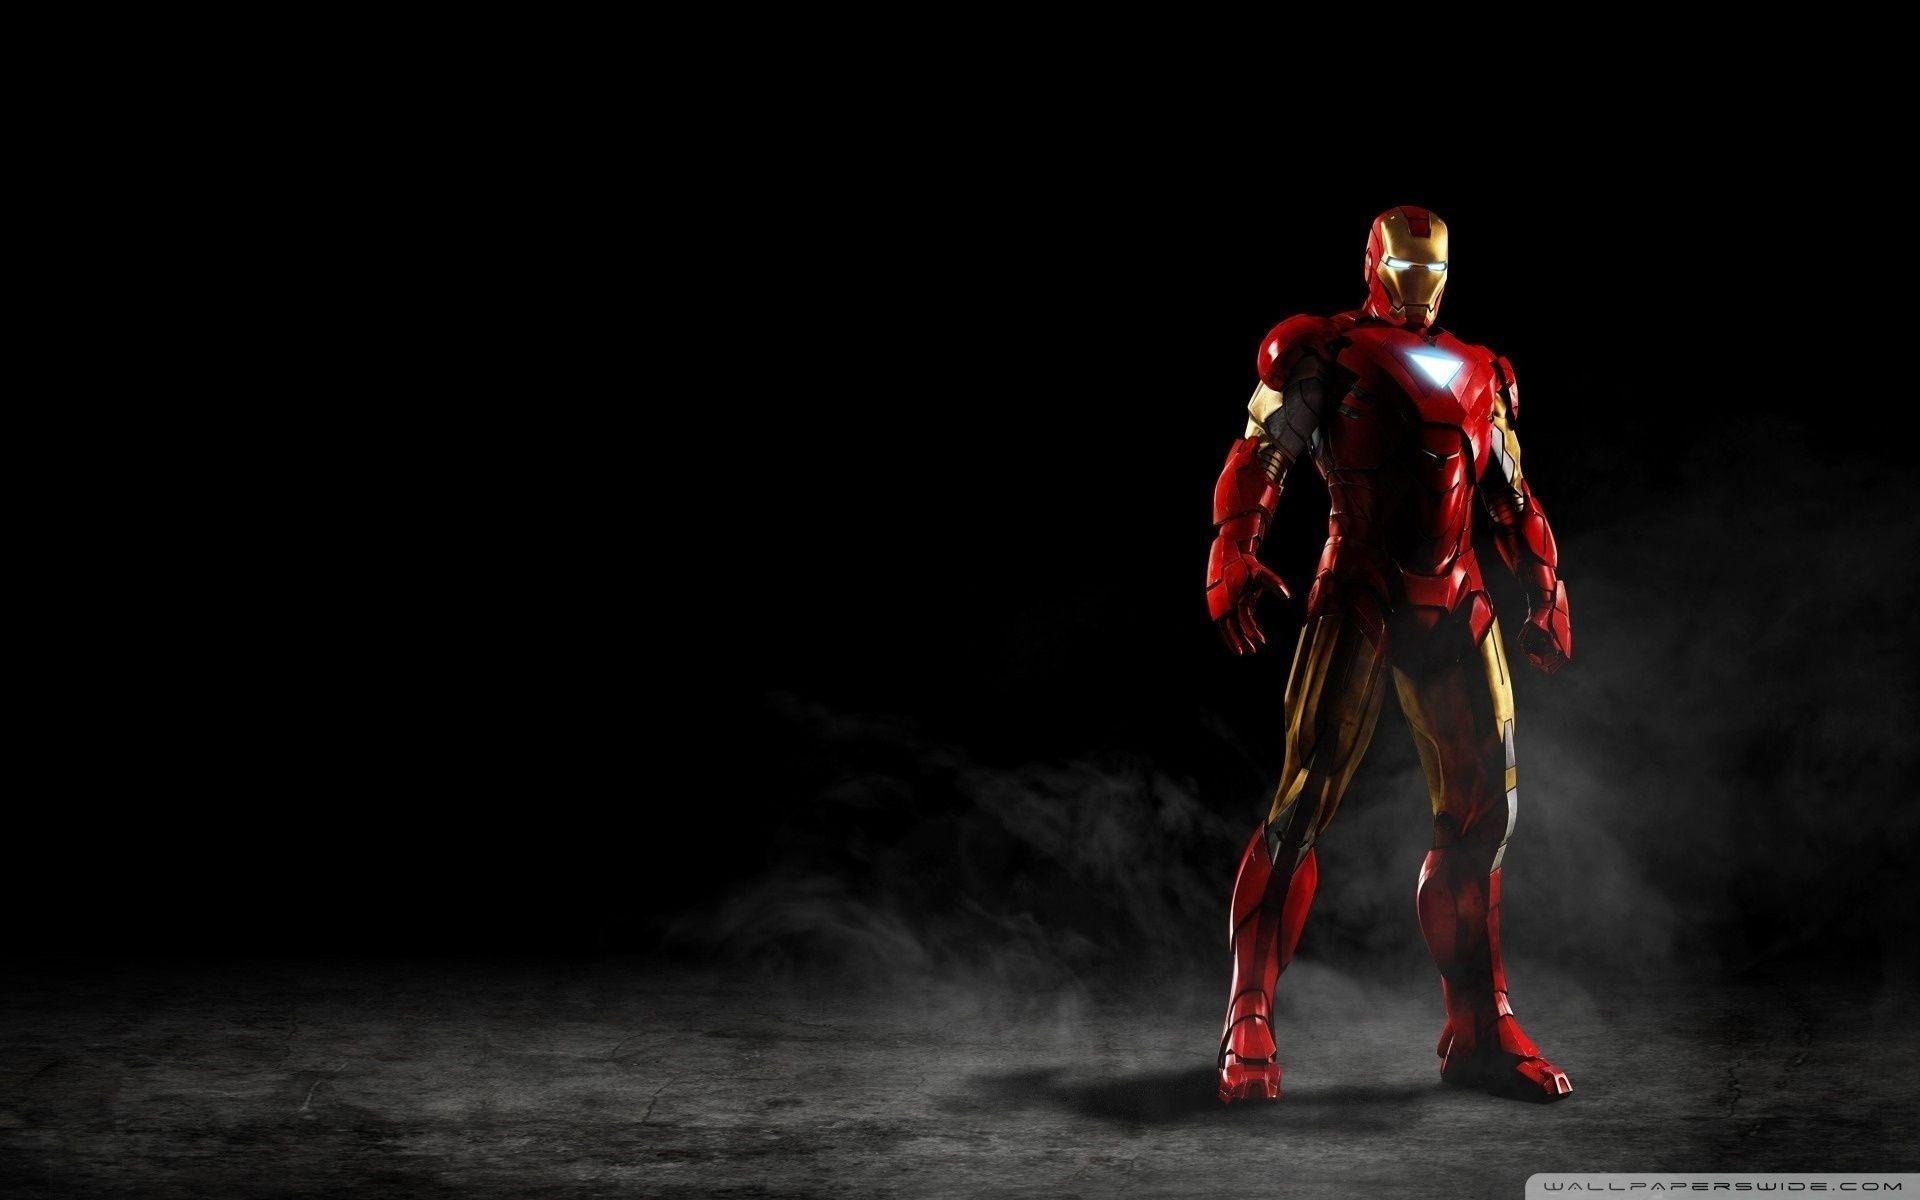 Iron Man Pc Wallpapers Wallpaper Cave